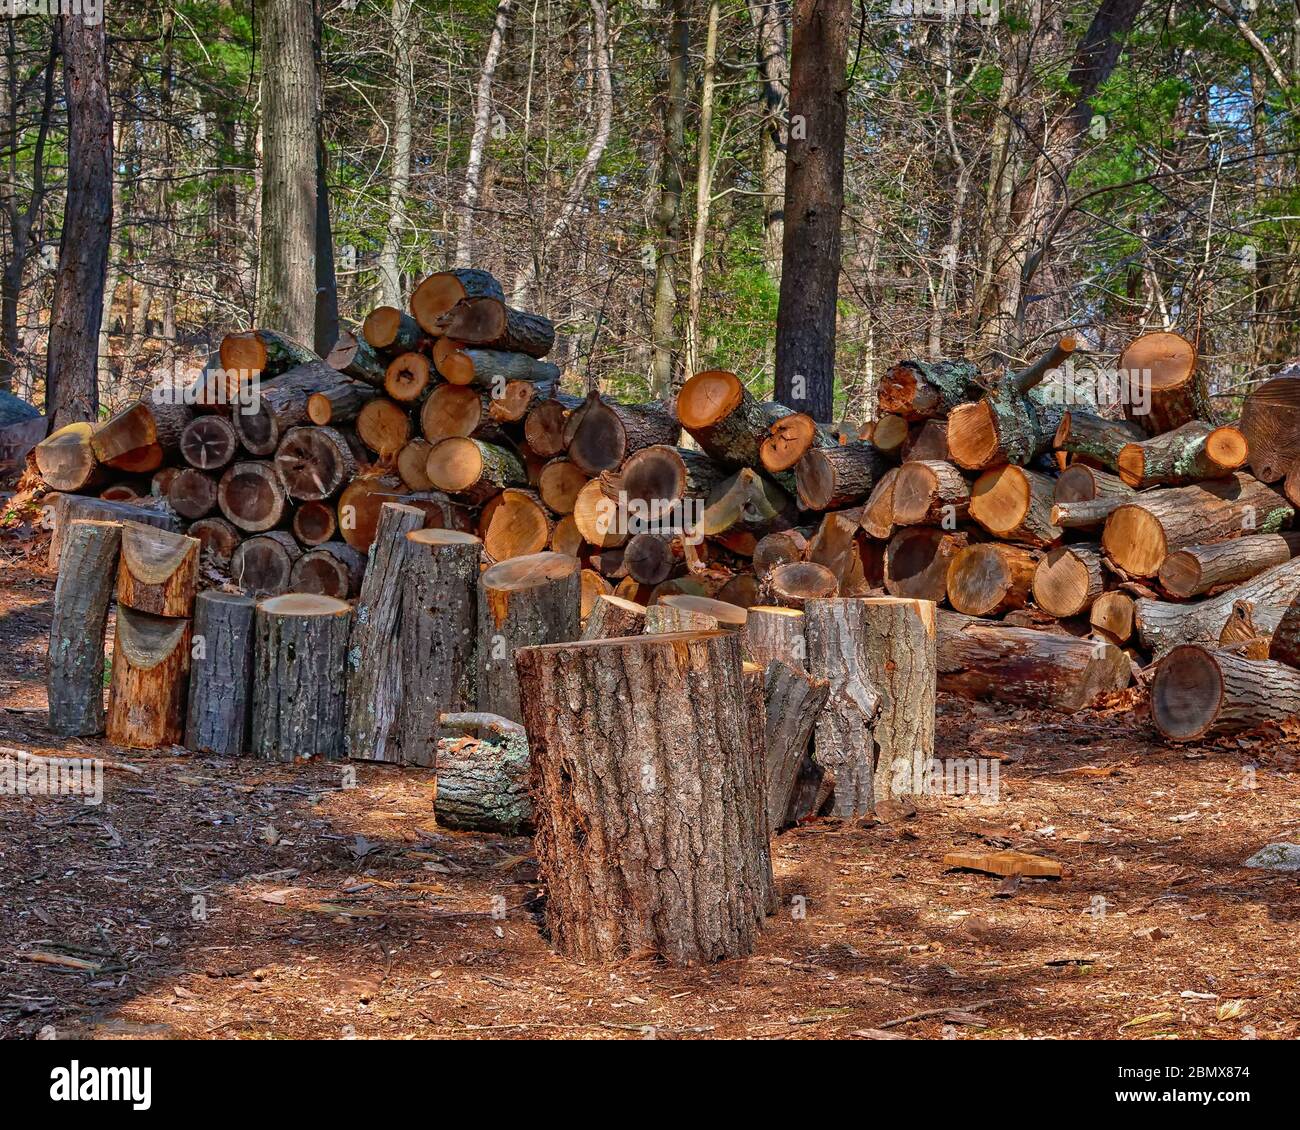 Freshly cut and stacked hardwood lay on a carpet of pine needles and sawdust in warm afternoon sunlight. The firewood has been prepared by the Breakhe Stock Photo